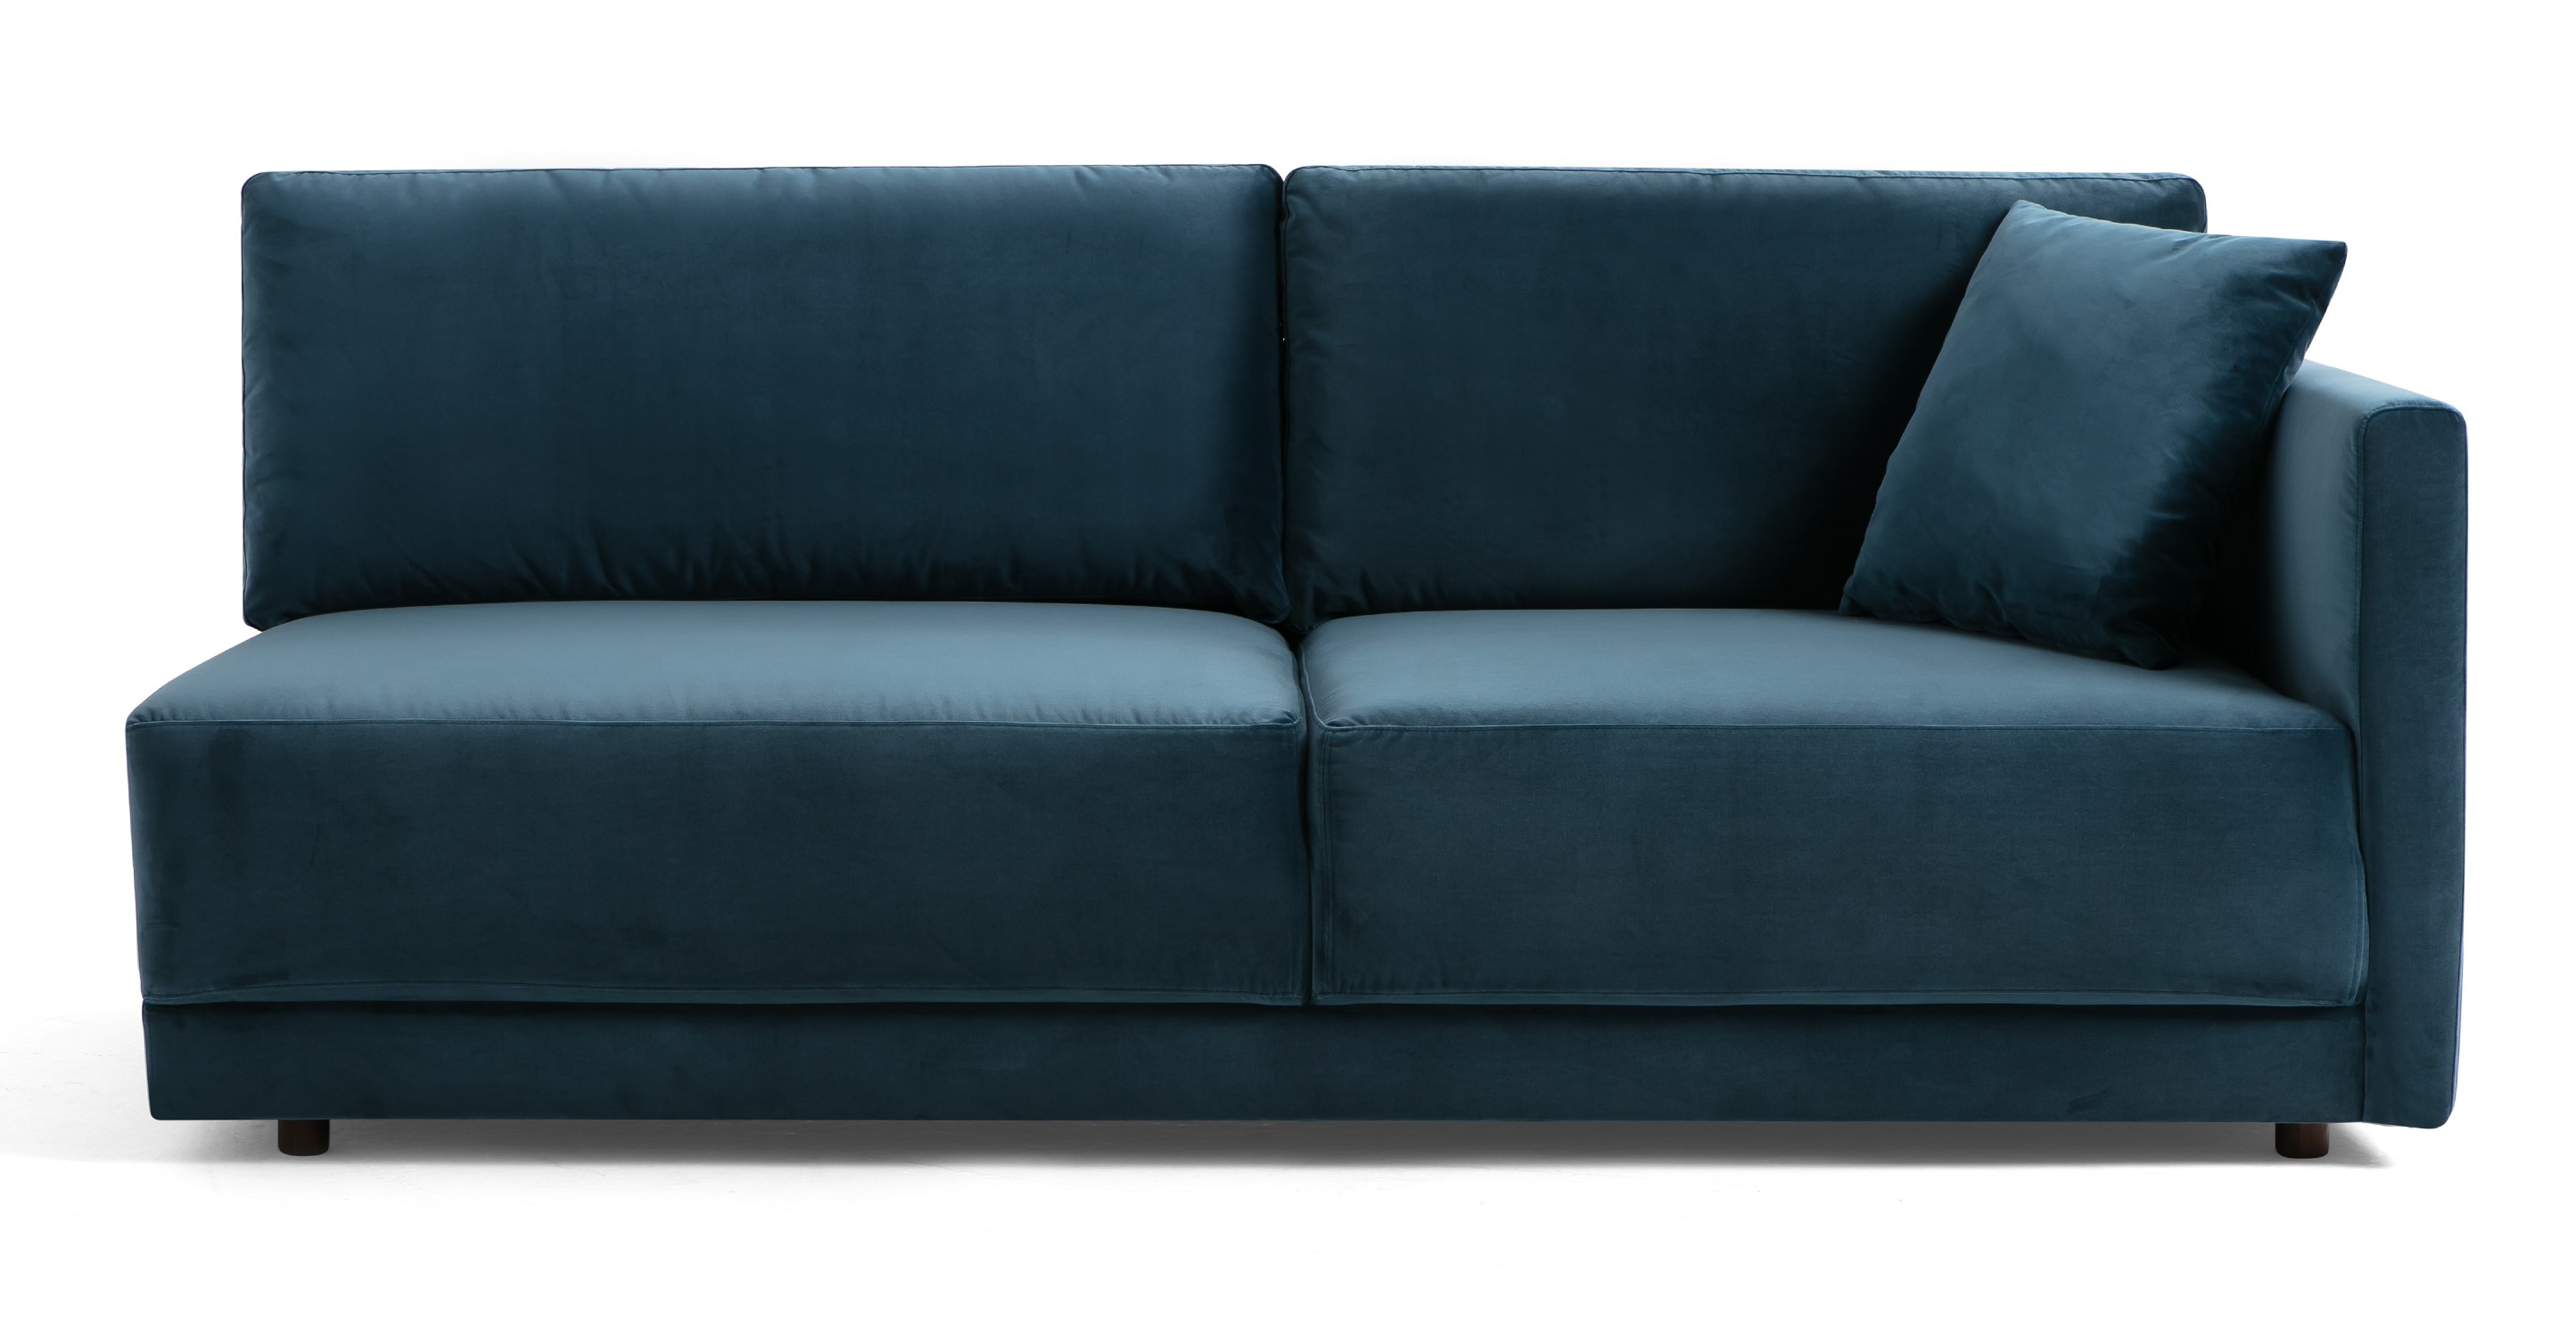 Petrol Domus Right Arm Sofa has one straight arm on the right when facing, two back cushions, two fixed seat cushions, and one throw. This item can be used alone or added as part of the Domus series. The Domus is a floor based series, fully upholstered with a thick attached seat cushion. The style is modern and minimalist.